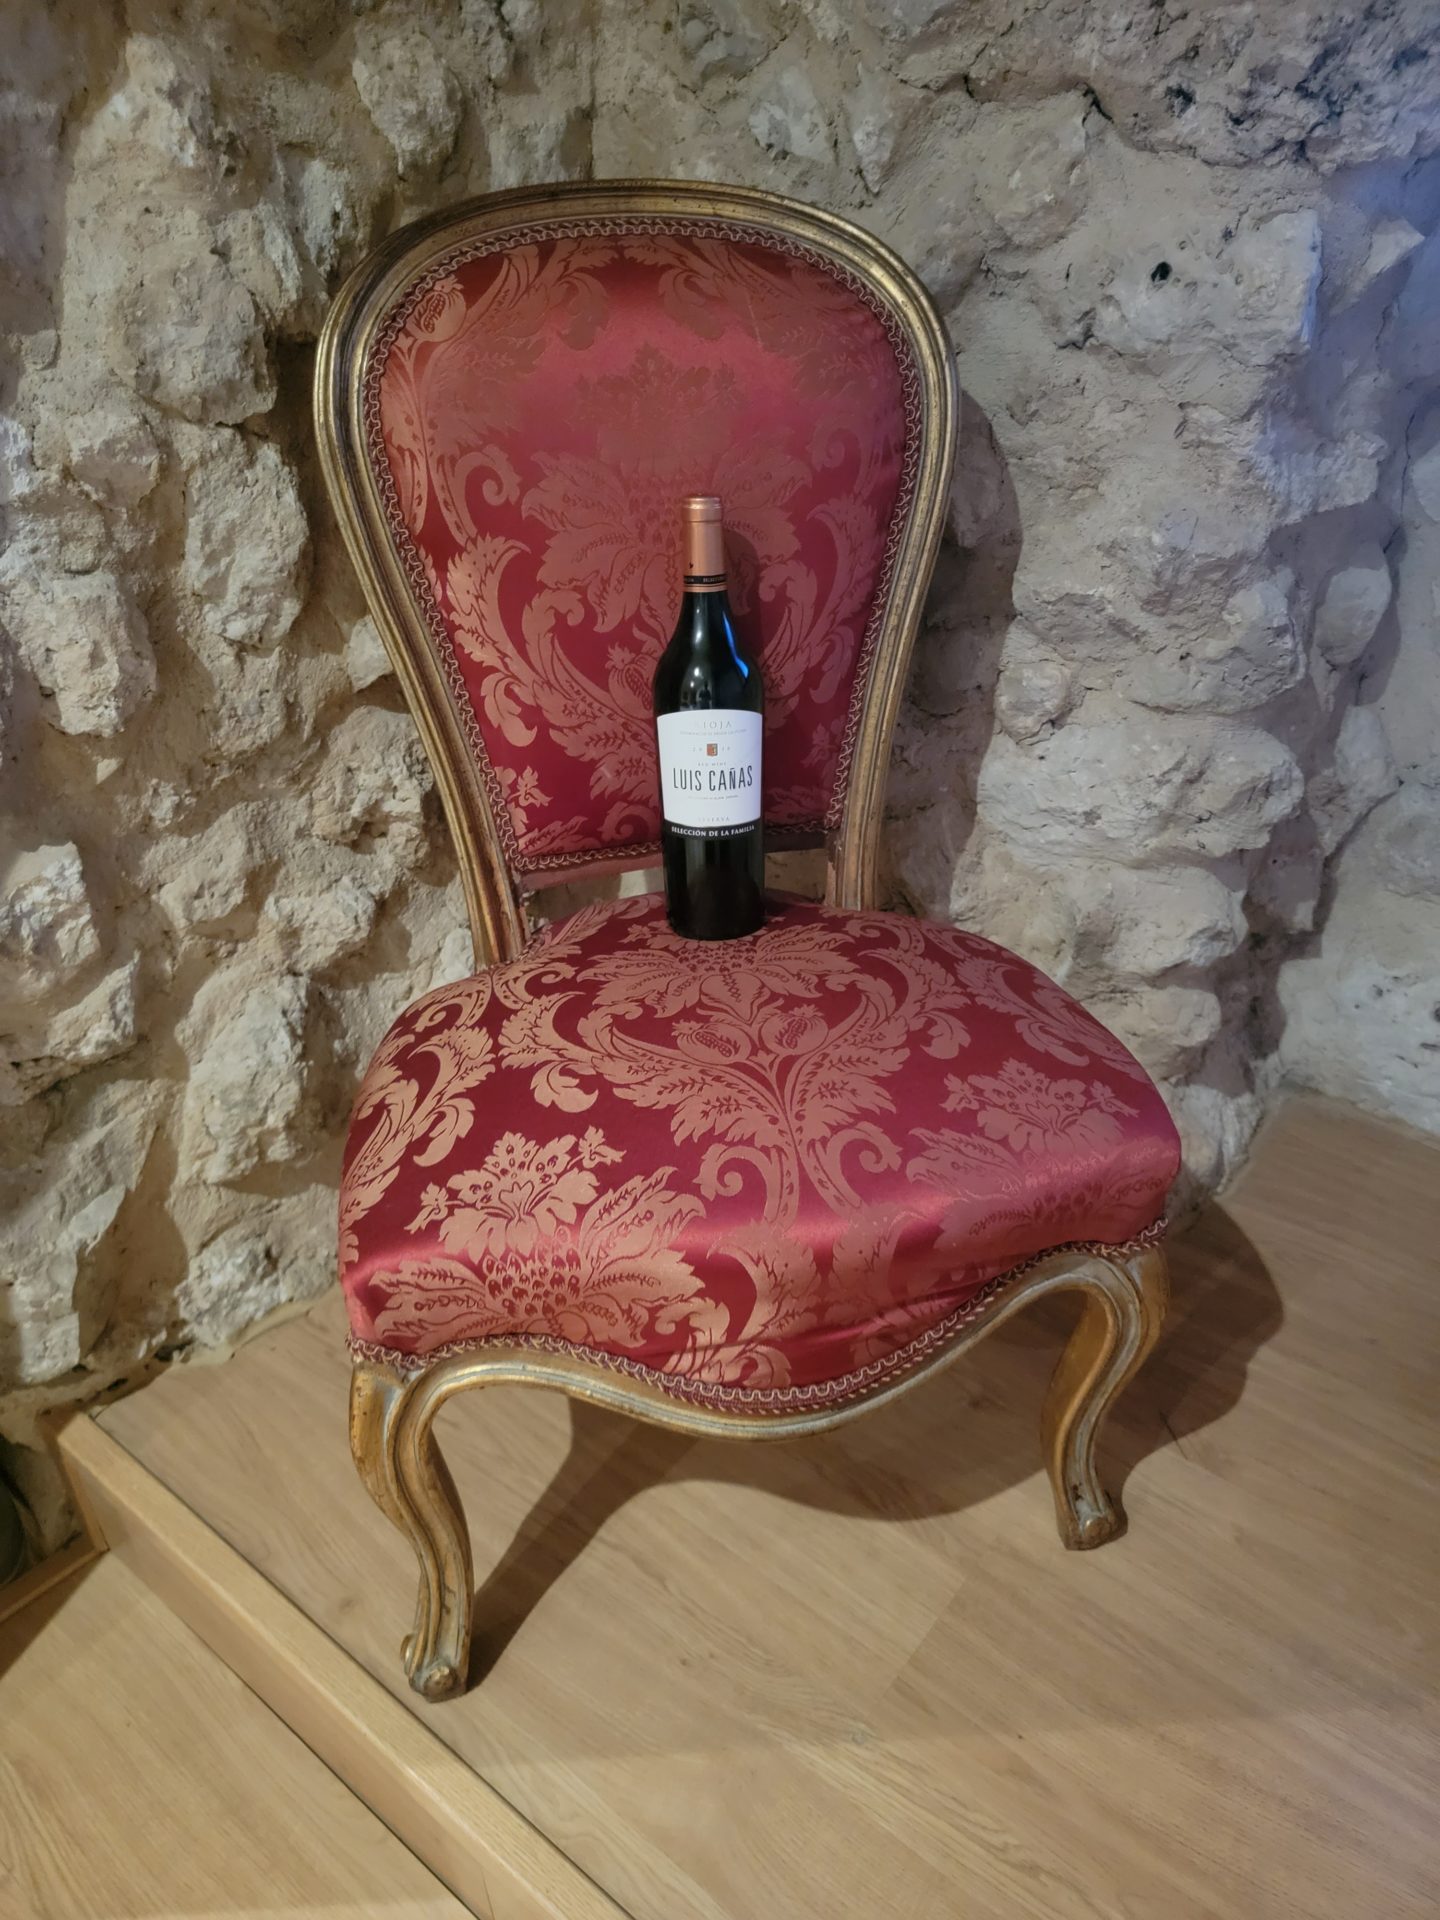 a bottle of wine on a red chair